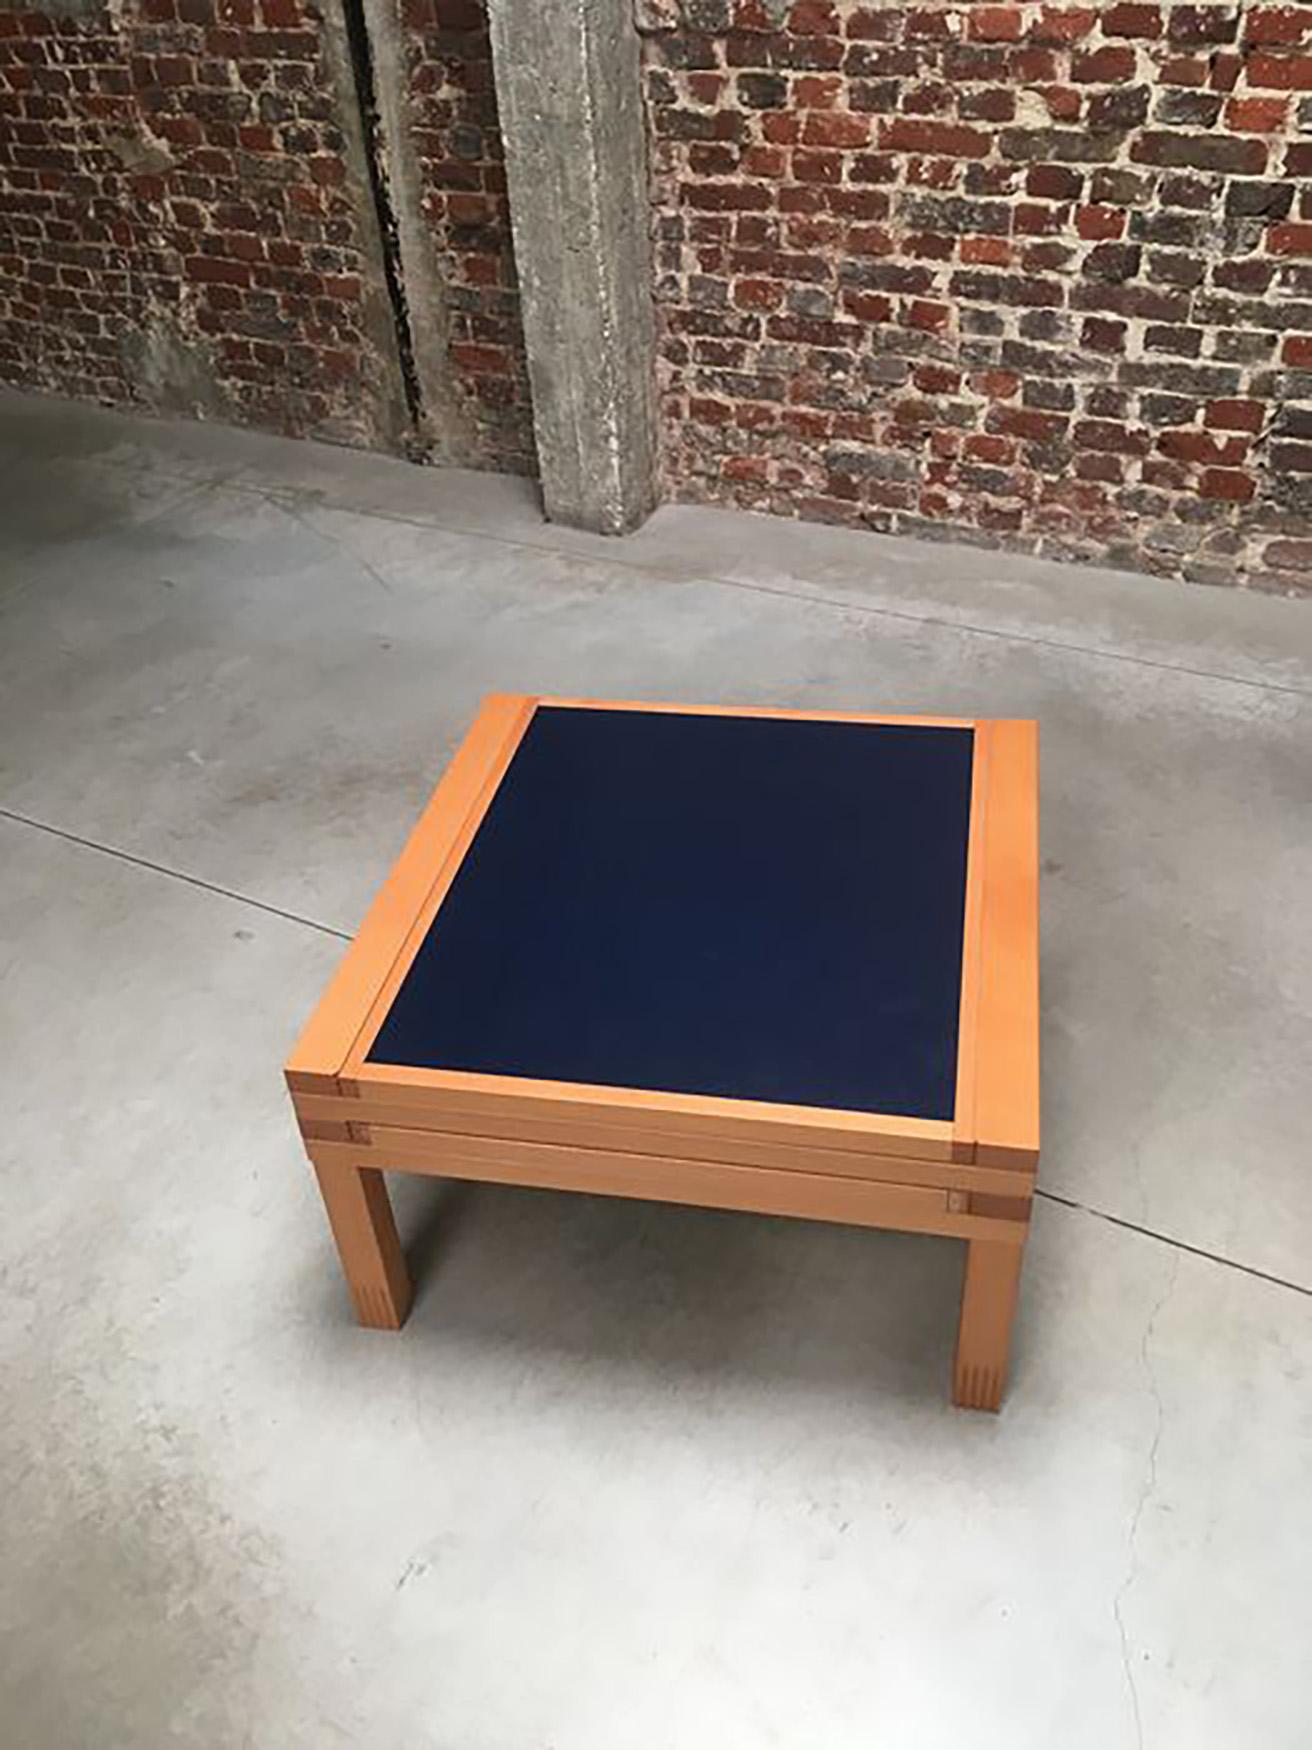 Unique coffee table manufactured by Bellato and designed by Bernard Vuarnesson. Since the 1980s.
The table offers many possibilities, as it has four sliding drawers that can also be turned, making them white or blue. You can also place them next to